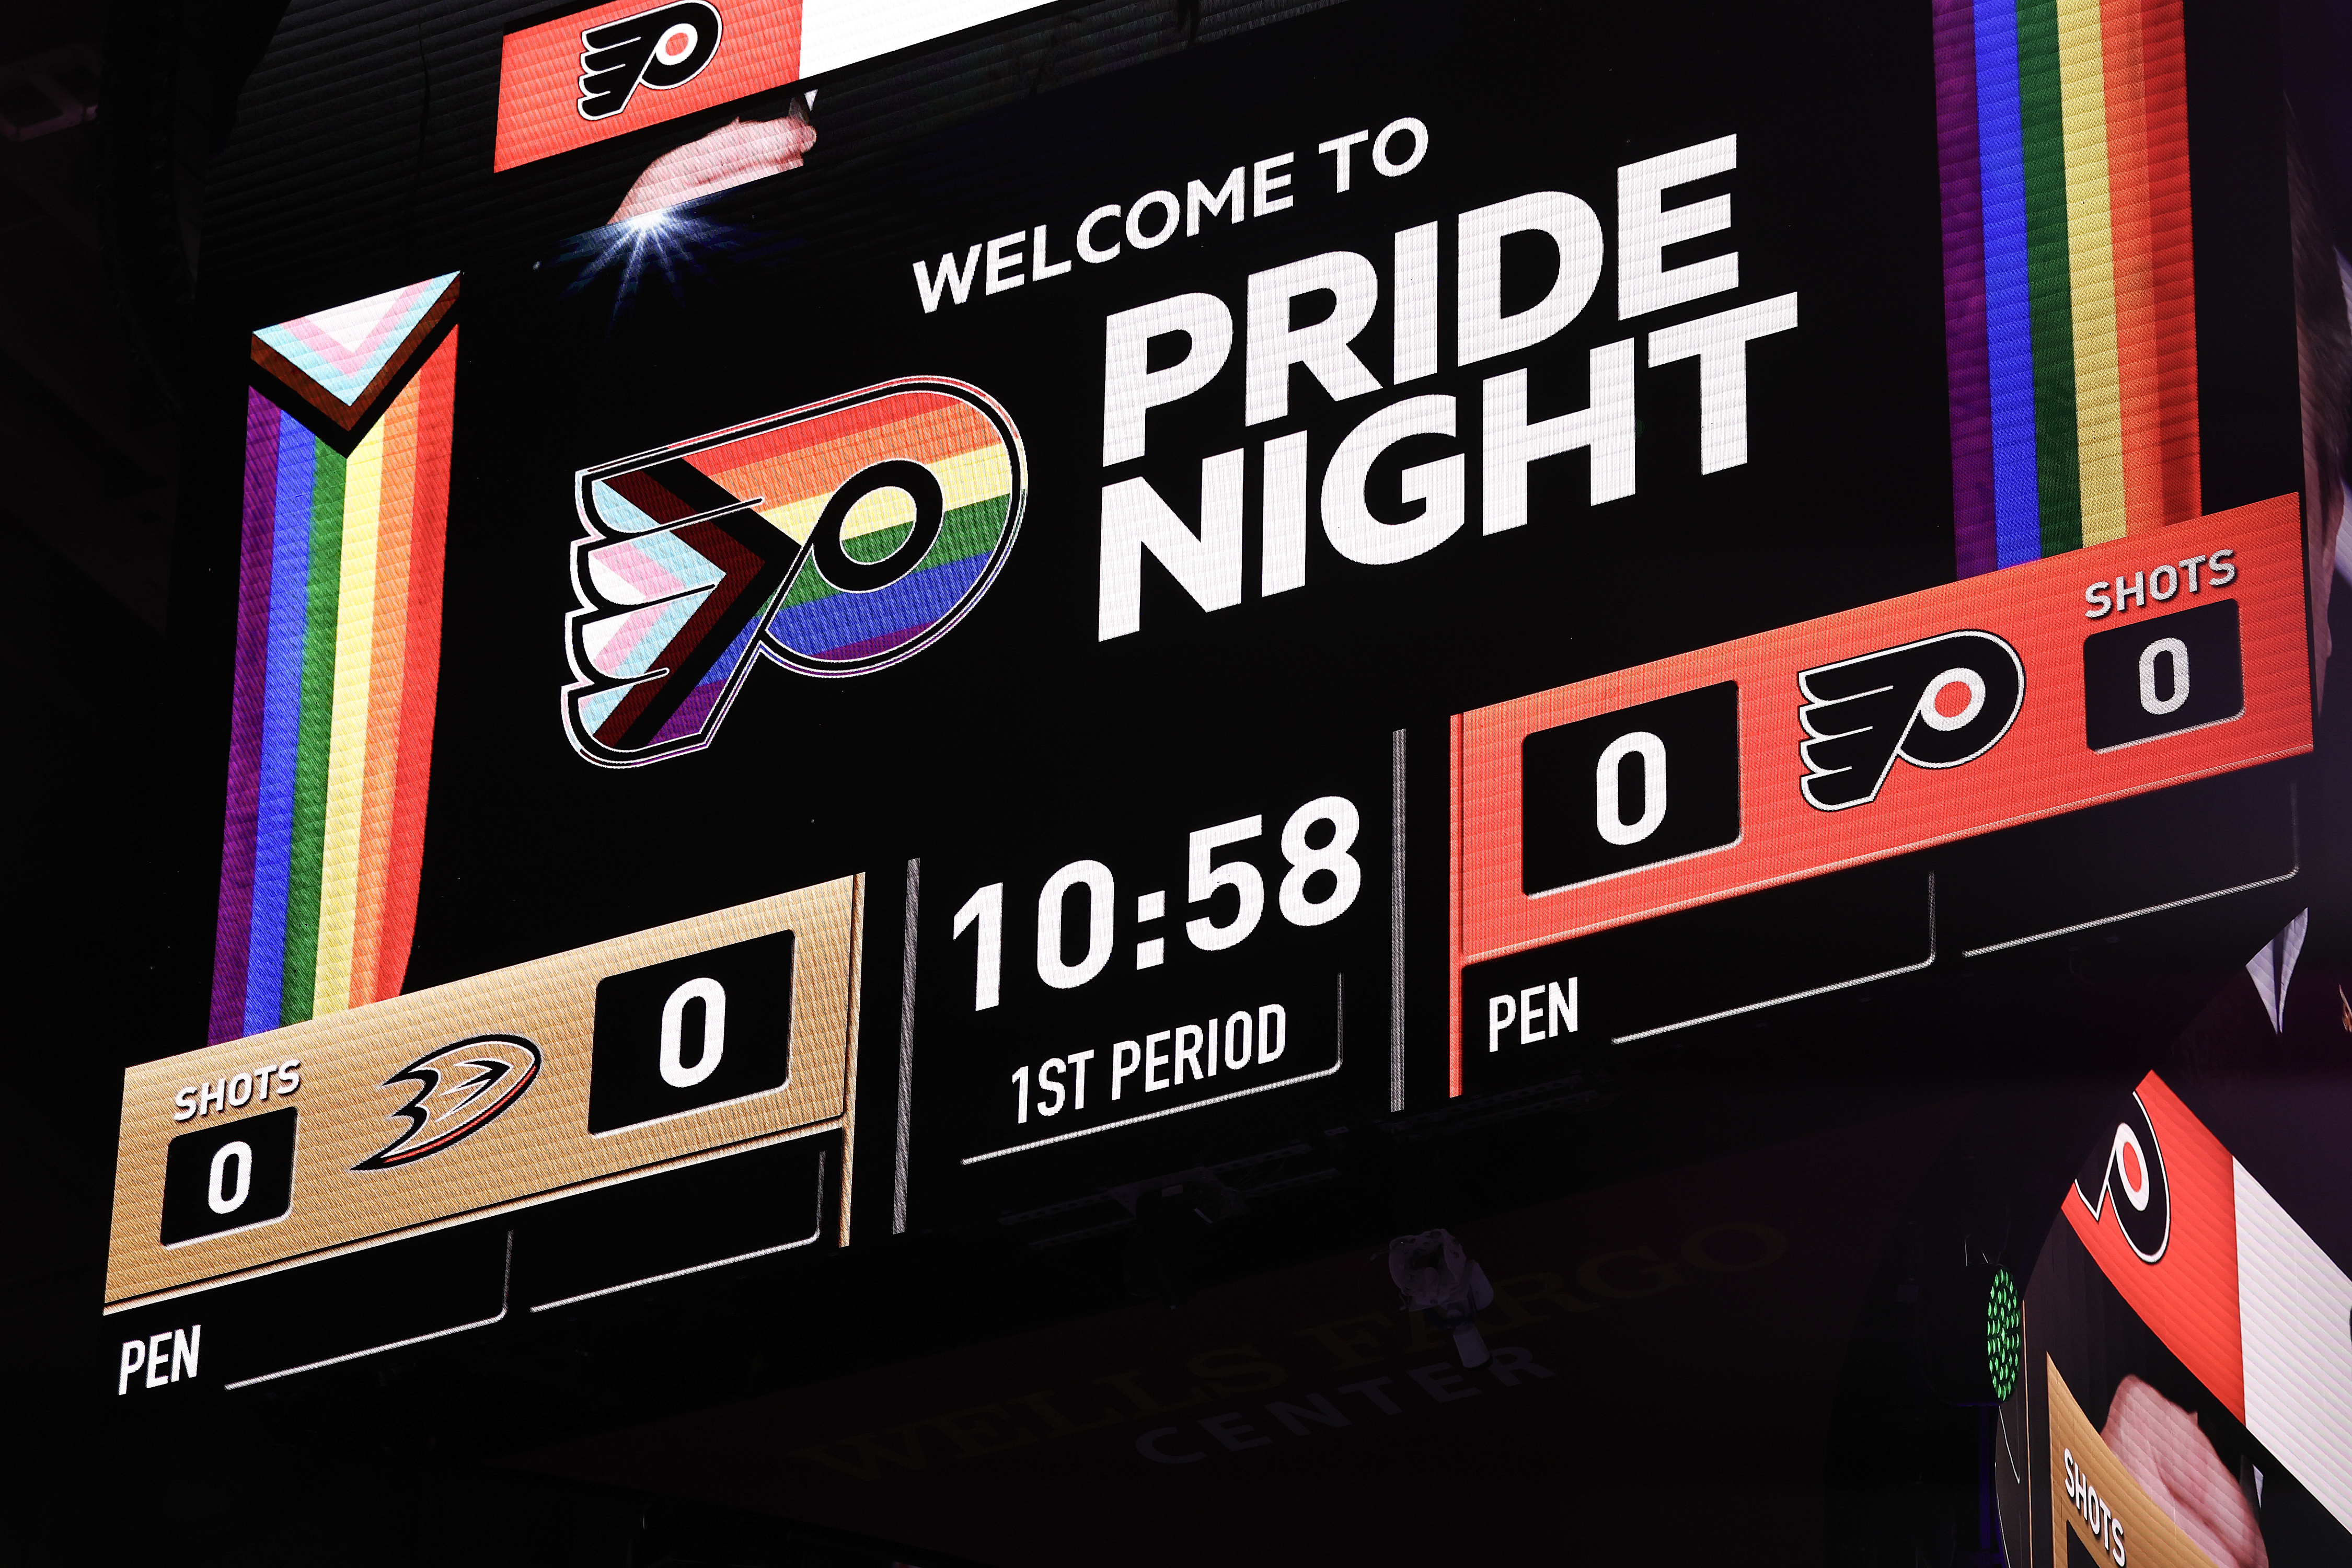 My choice is to stay true to myself': Flyers' Provorov cites religion for  boycott on Pride night